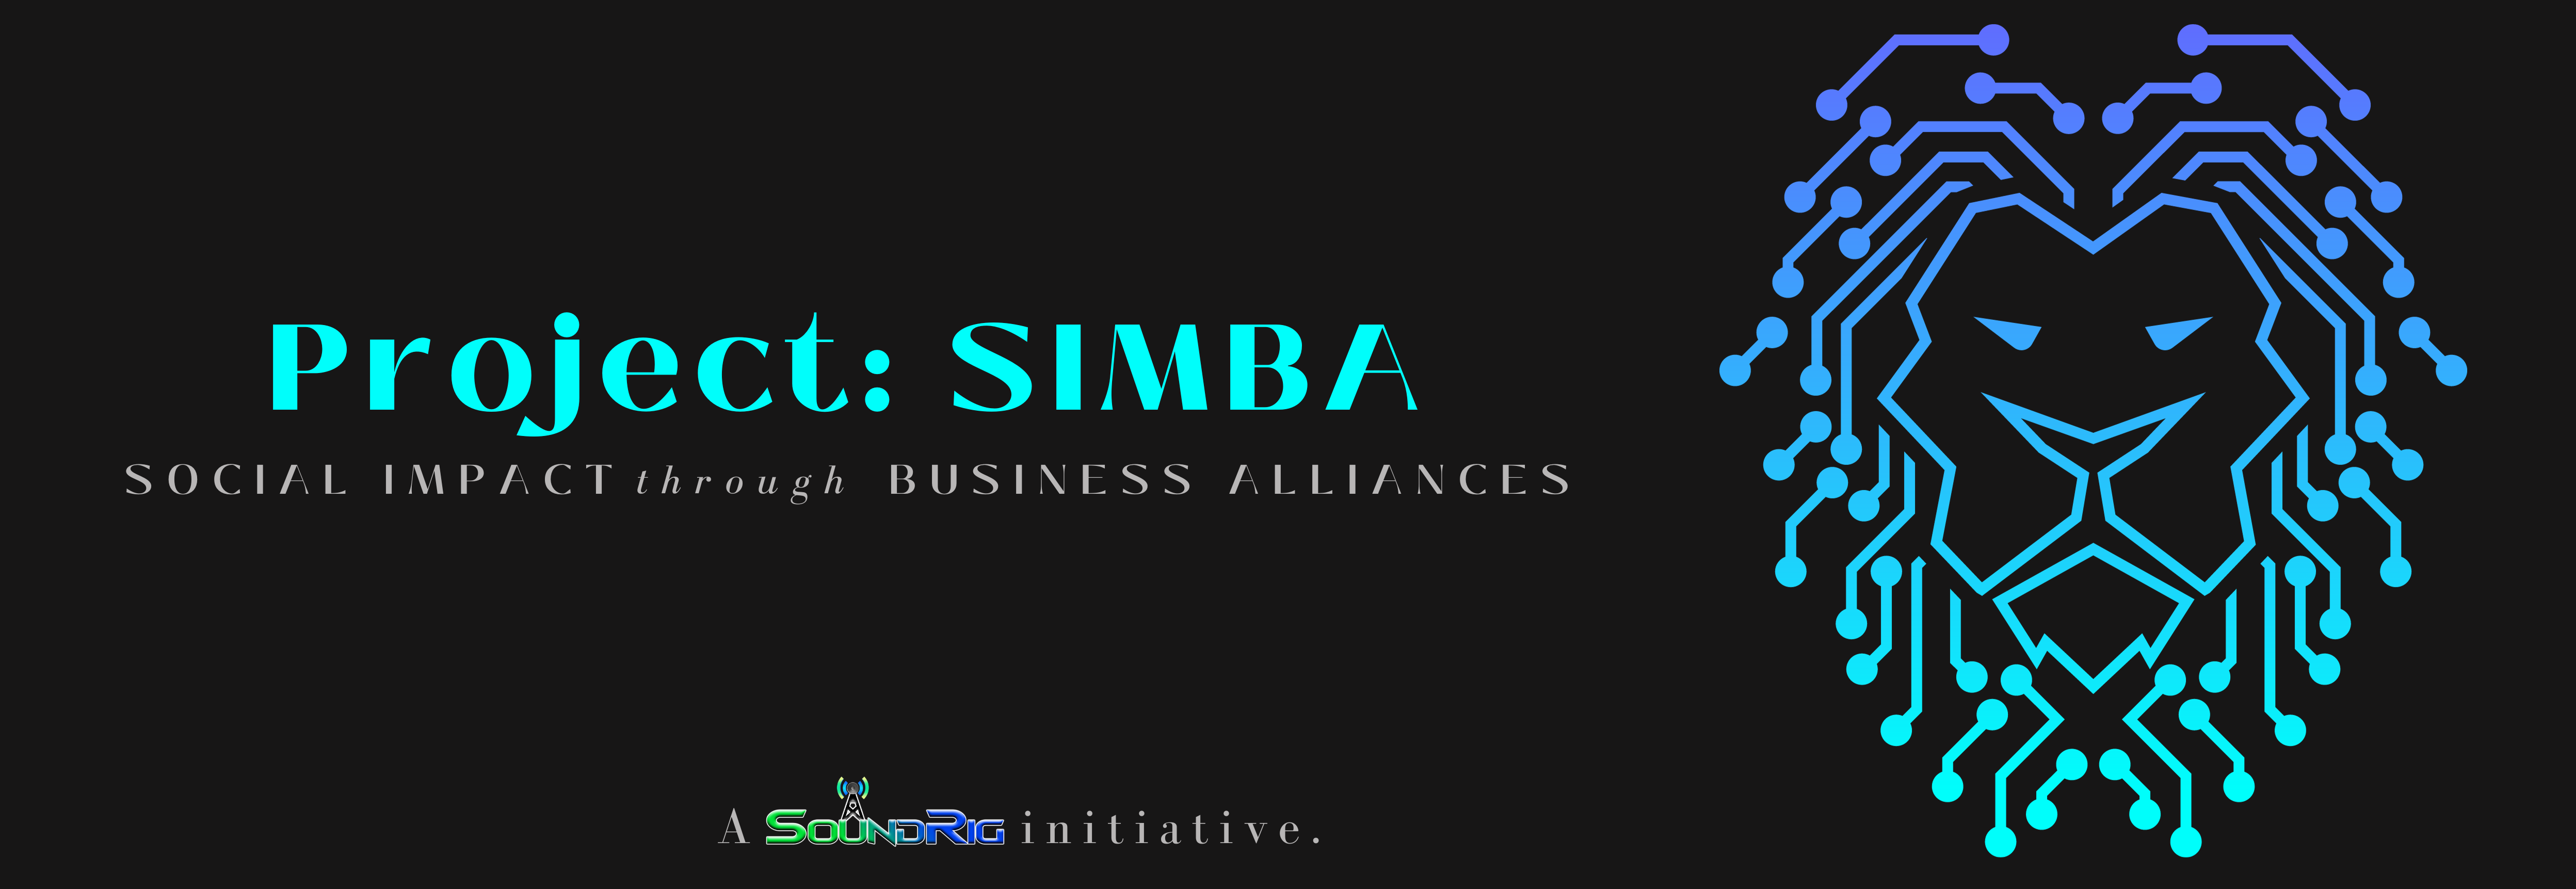 Project-SIMBA-New-Slim-Banner-b58cc1.png